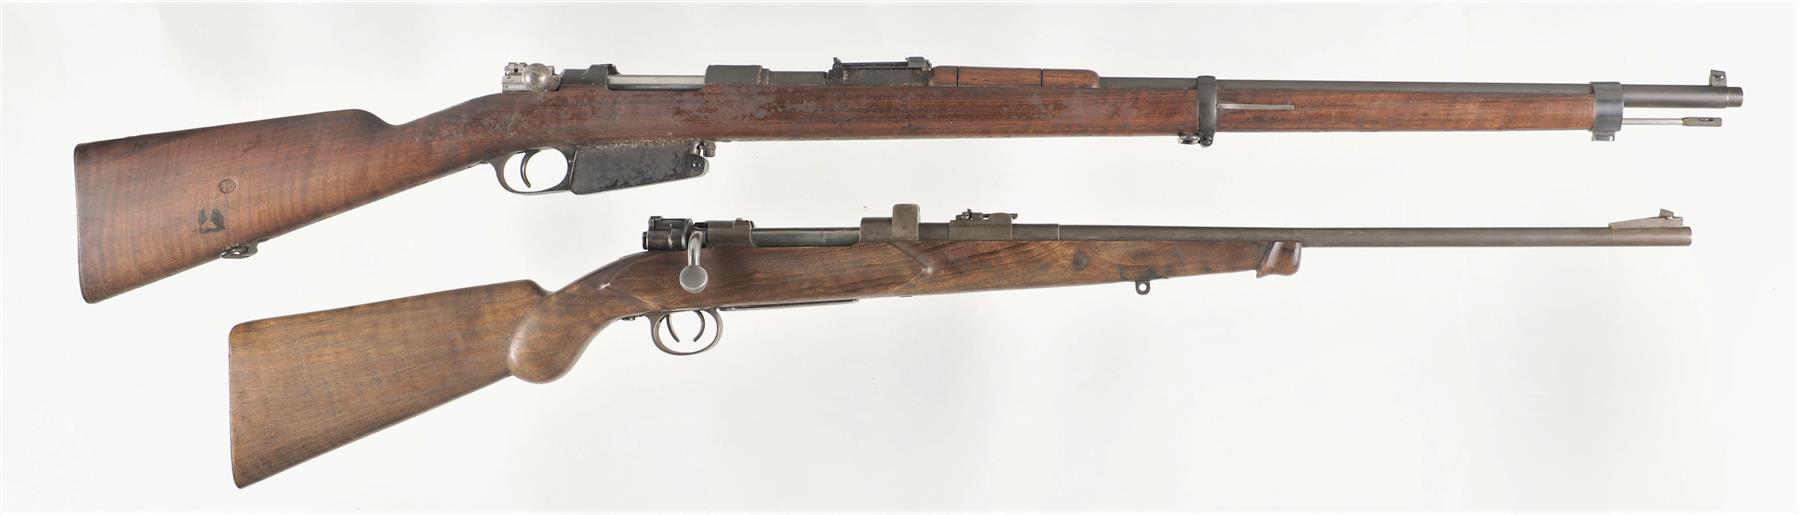 1891 argentine mauser date of manufacture